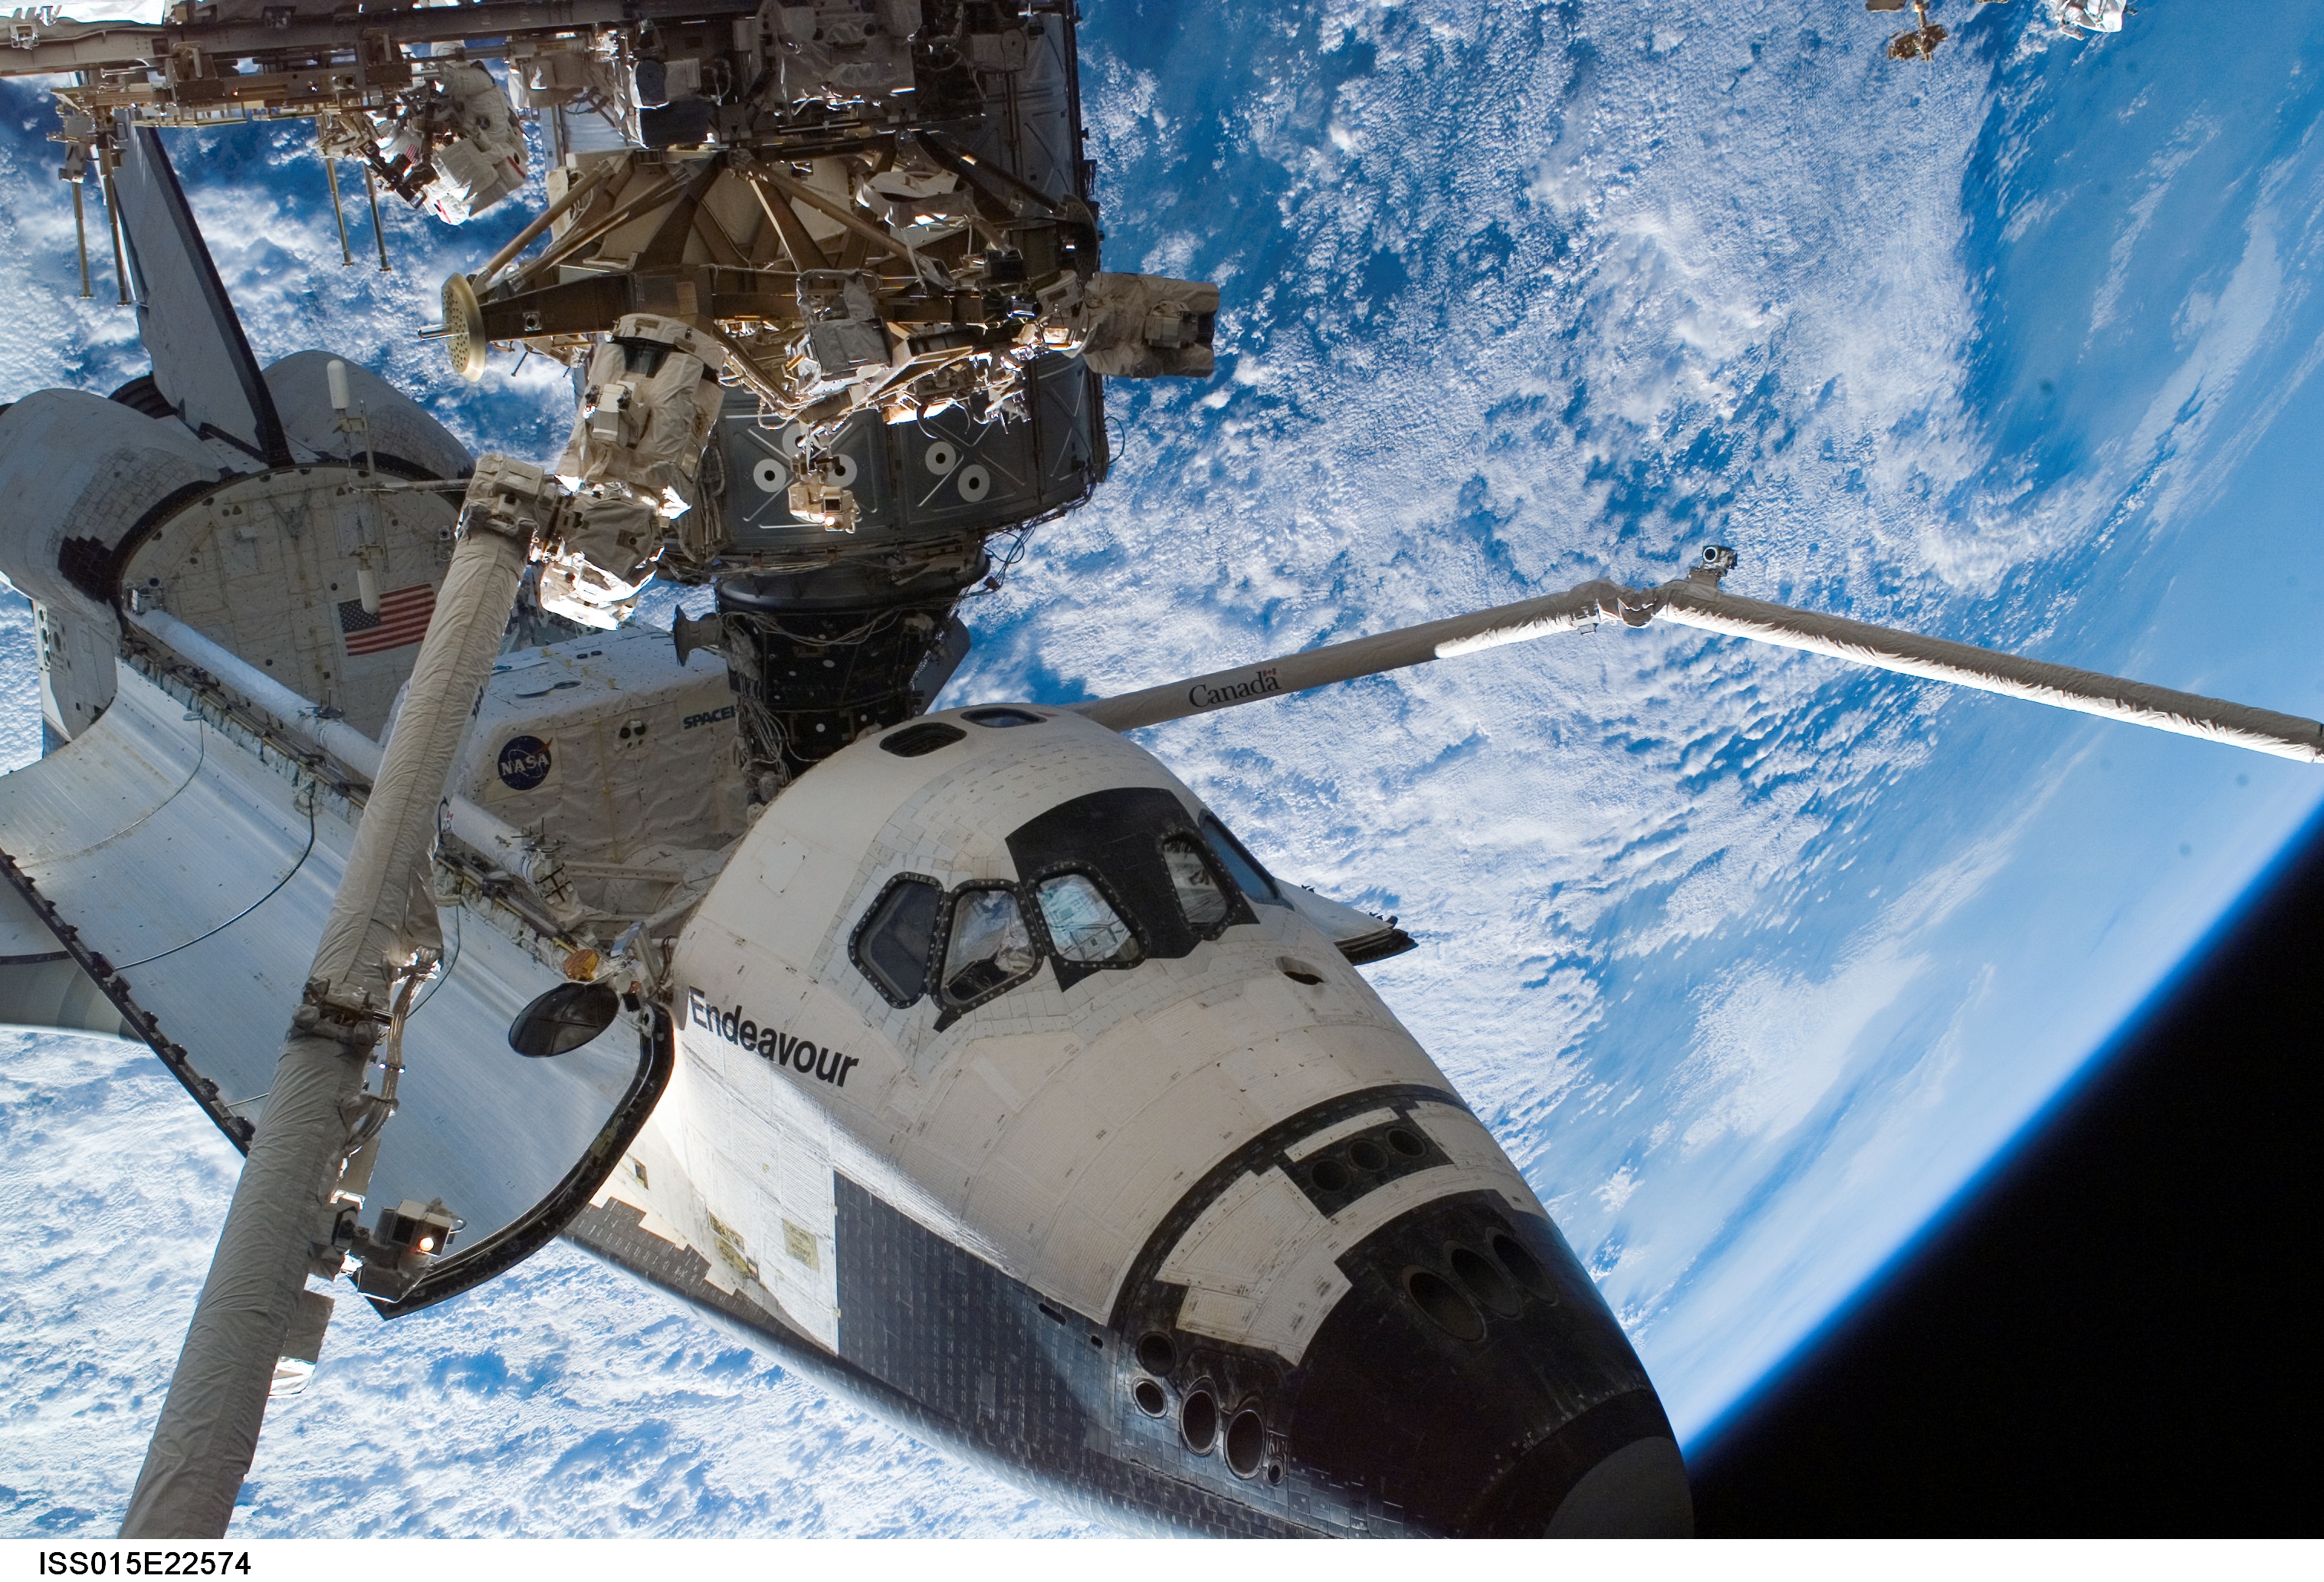 NASA HD desktop wallpaper of space shuttle and satellite captured from space, showing Earth.